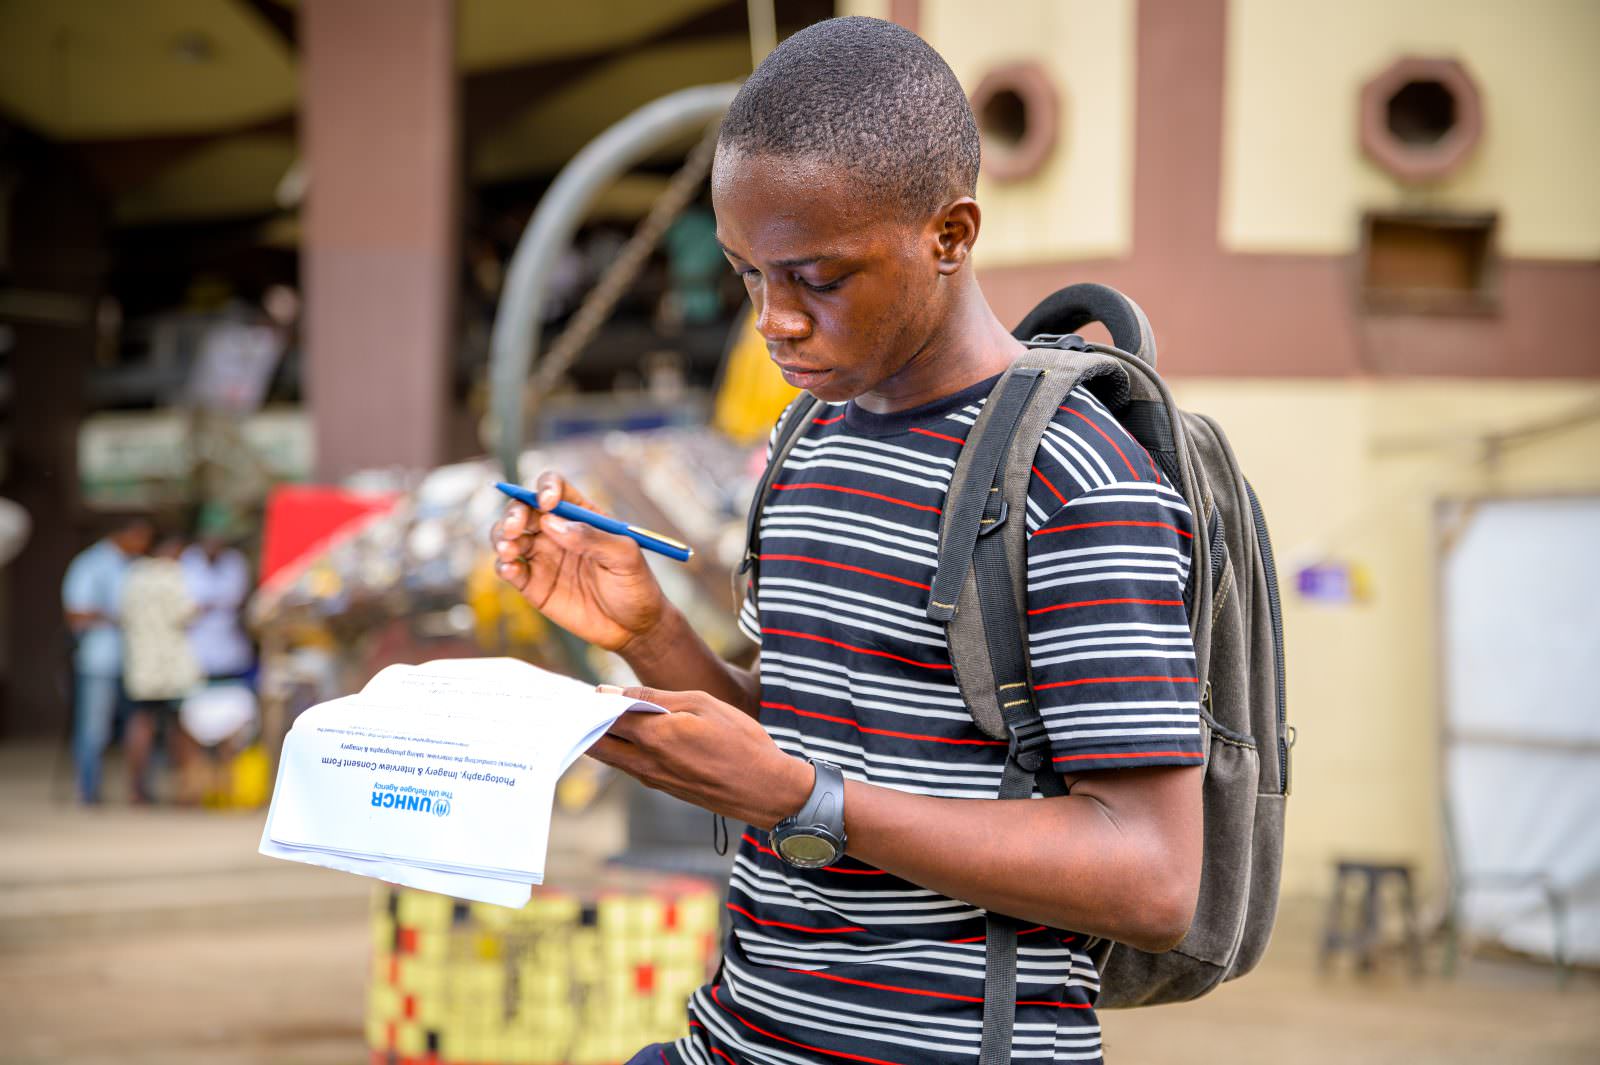 Gideon Diasuka Moembo, 21, arrived from DRC to Nigeria as a child, and has spent his entire life in the country. He is now a brilliant student in microbiology at the Yaba College of technology, thanks to a DAFI scholarship, supported by UNHCR. Life is good now, and he longs for a future job in the biomedical field, in Nigeria or abroad, while keeping up with his passion, computer graphics. “I thank UNHCR for the support to all refugees' children like me, to help them to get a better future and dream big”.
The DAFI scholarship programme, supported by the German government and UNHCR, constitutes one of the five core pillars of the strategy to achieve 15 per cent enrolment of young refugee women and men in higher education by the year 2030 ; The DAFI scholarship programme, supported by the German government and UNHCR, constitutes one of the five core pillars of the strategy to achieve 15 per cent enrolment of young refugee women and men in higher education by the year 2030